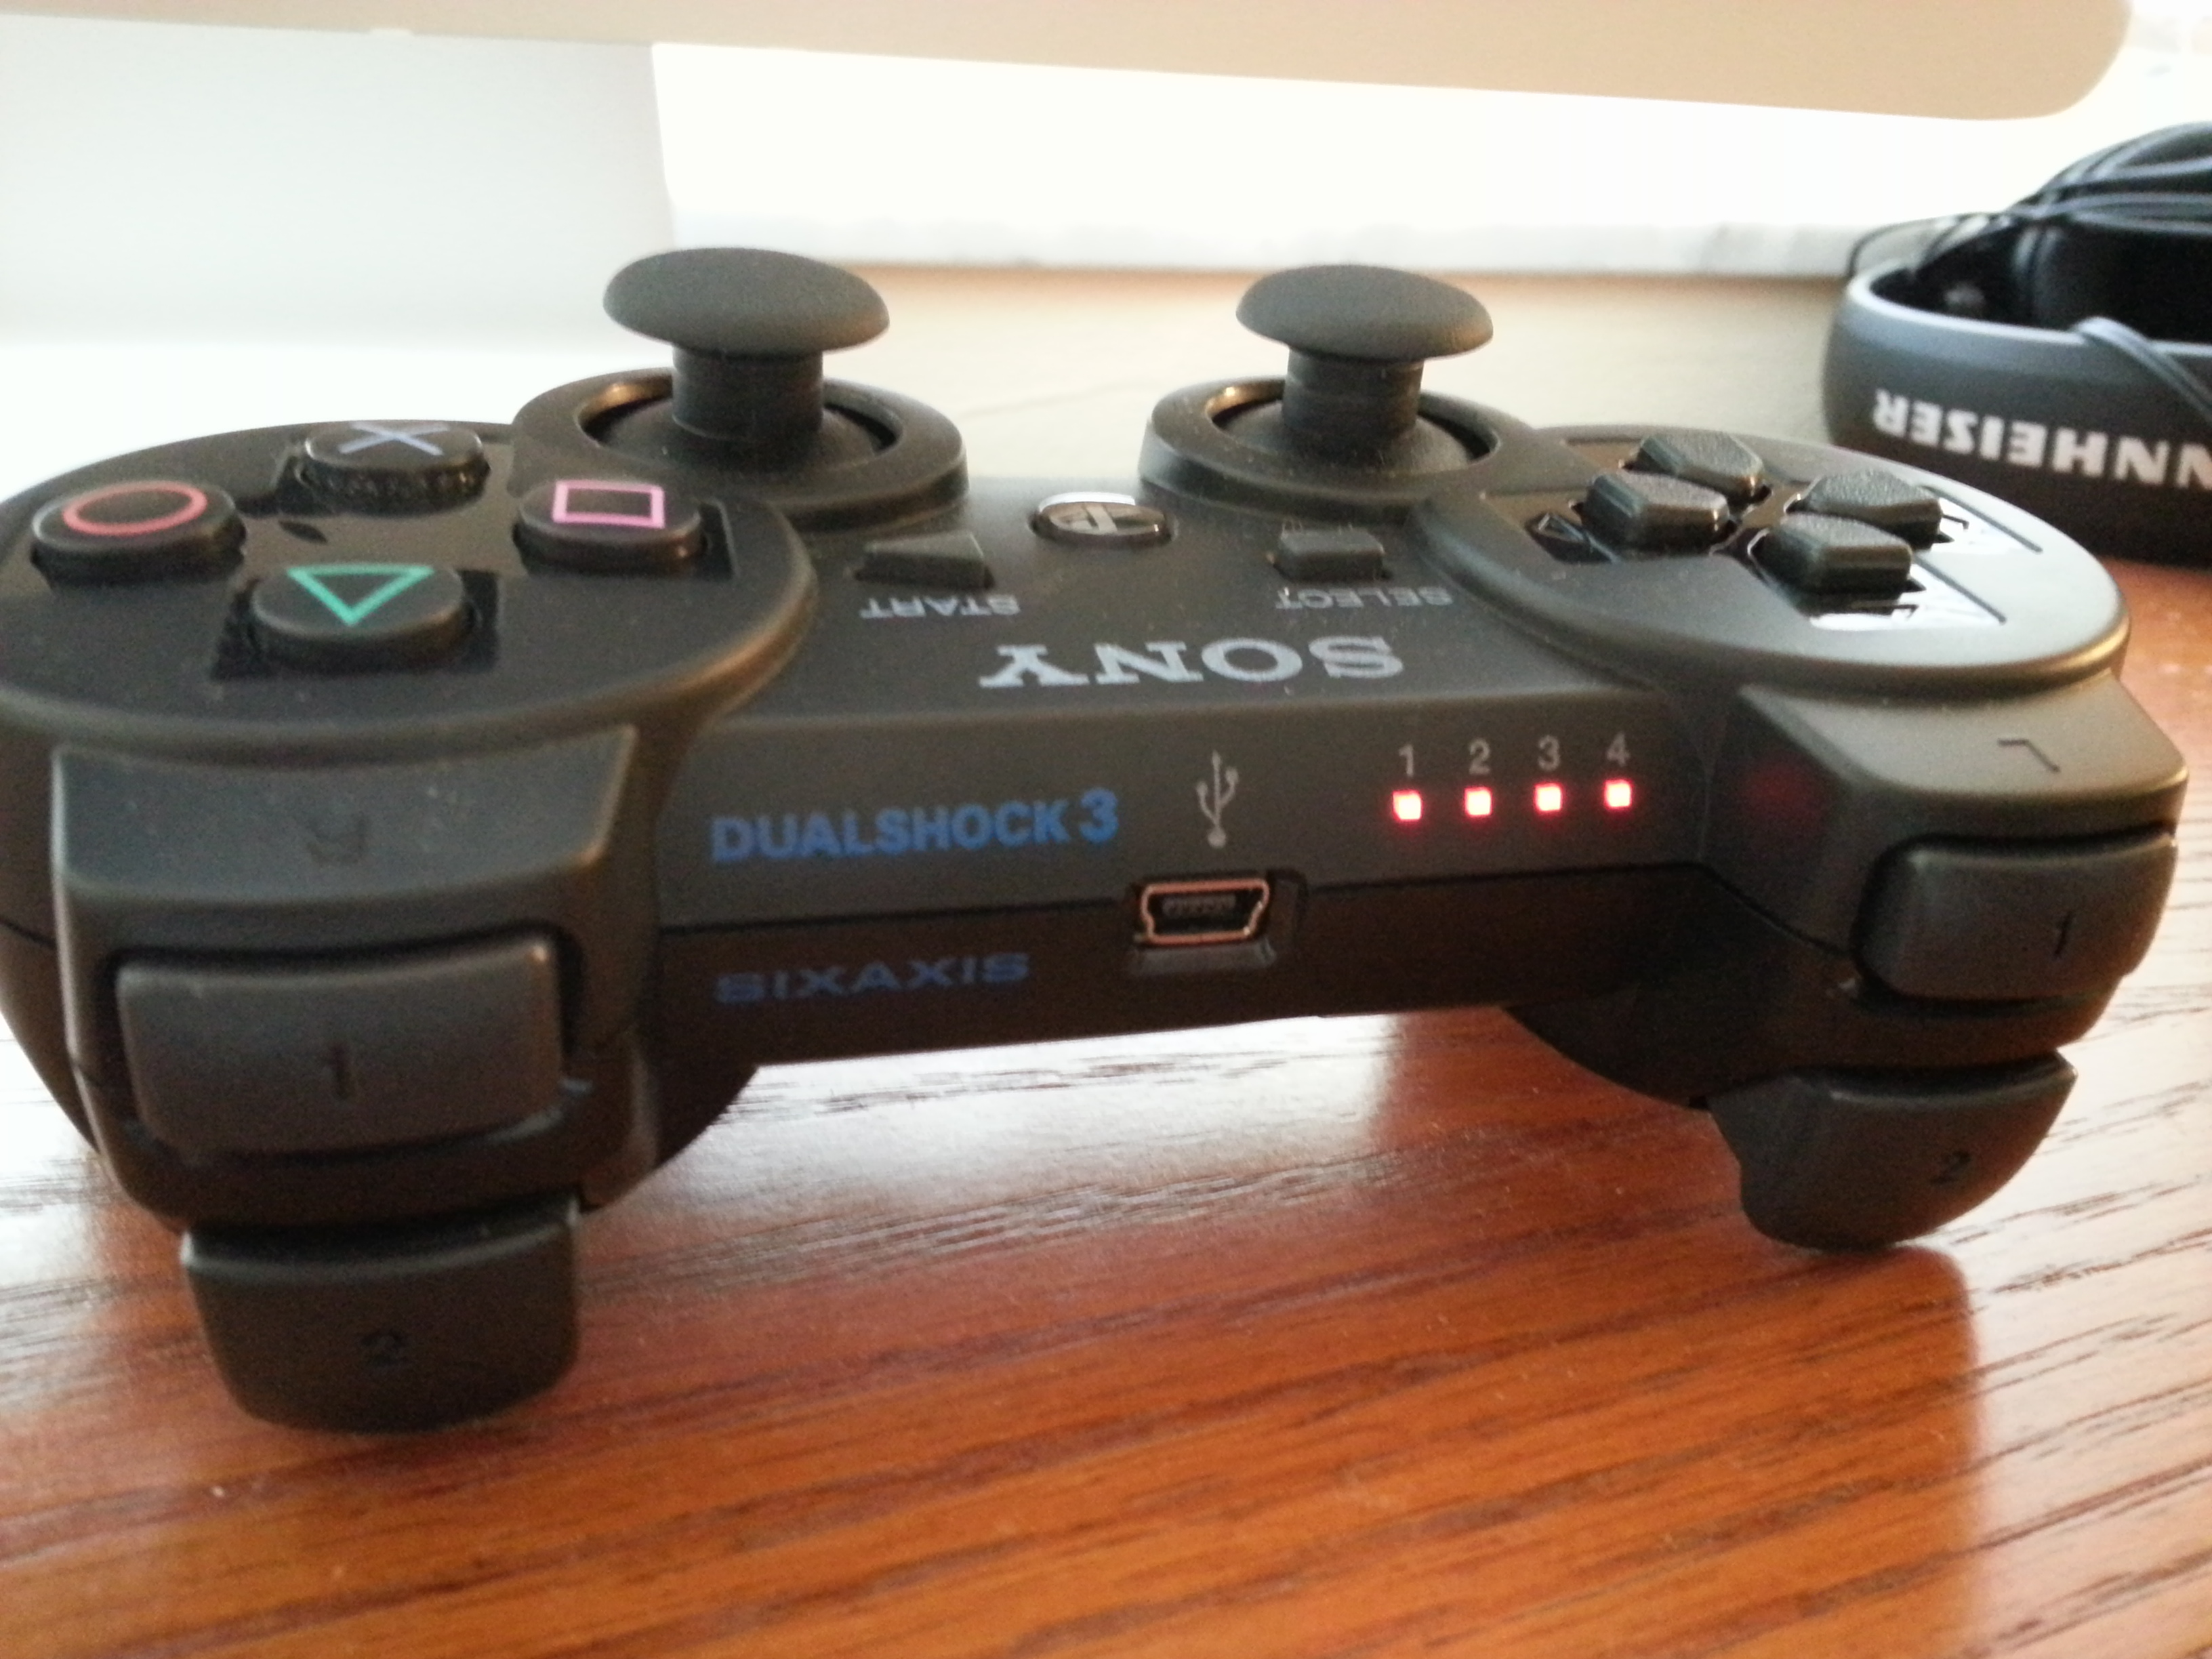 how to use pelican ps3 controller on mac with usb